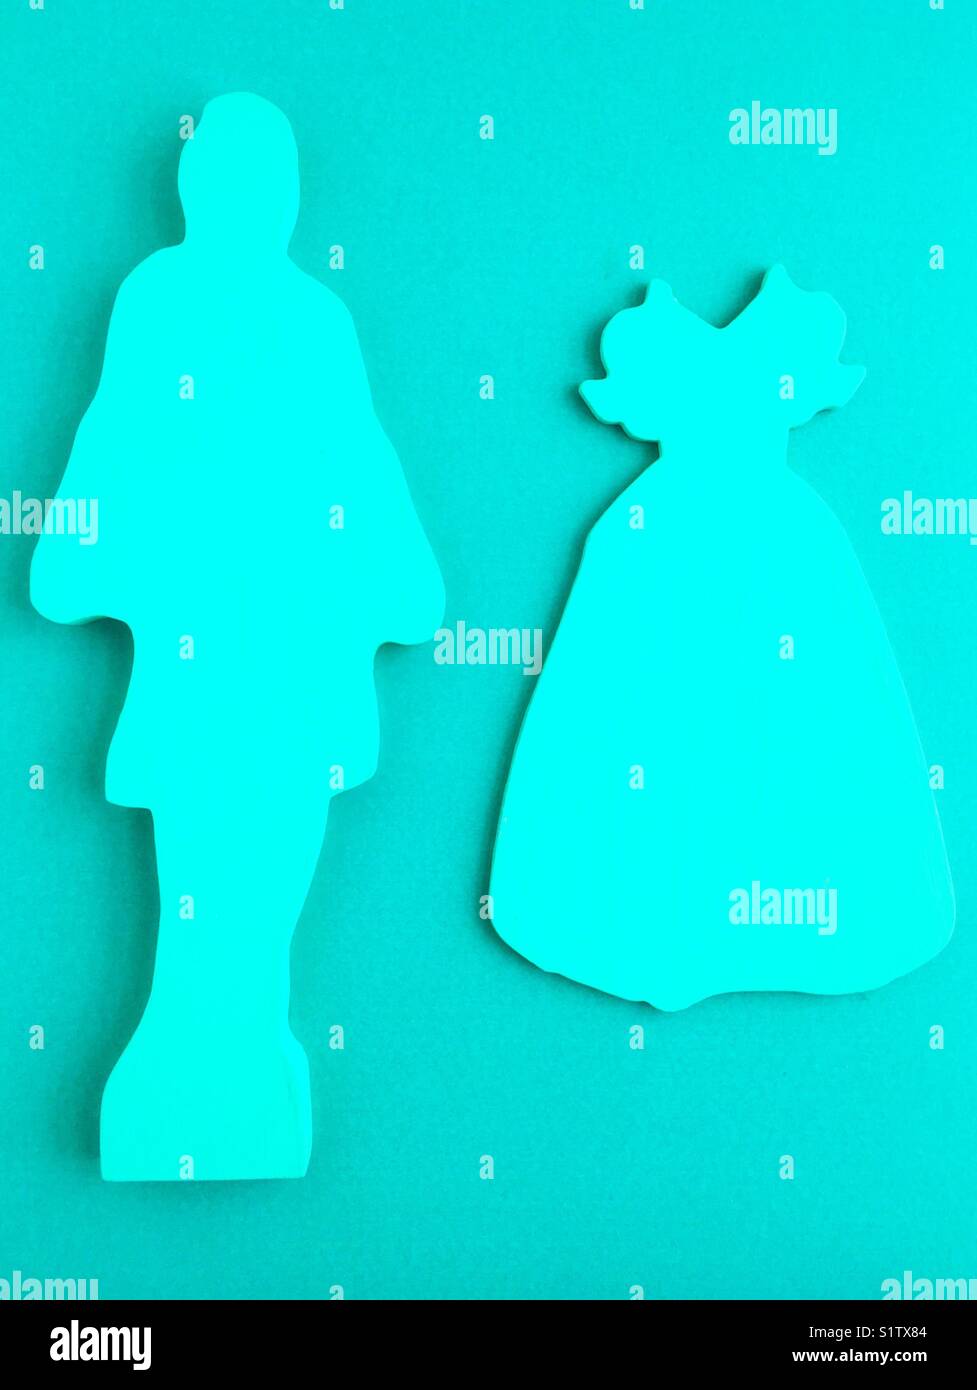 Monochromatic cutout shapes of a woman and a frilly dress. Stock Photo